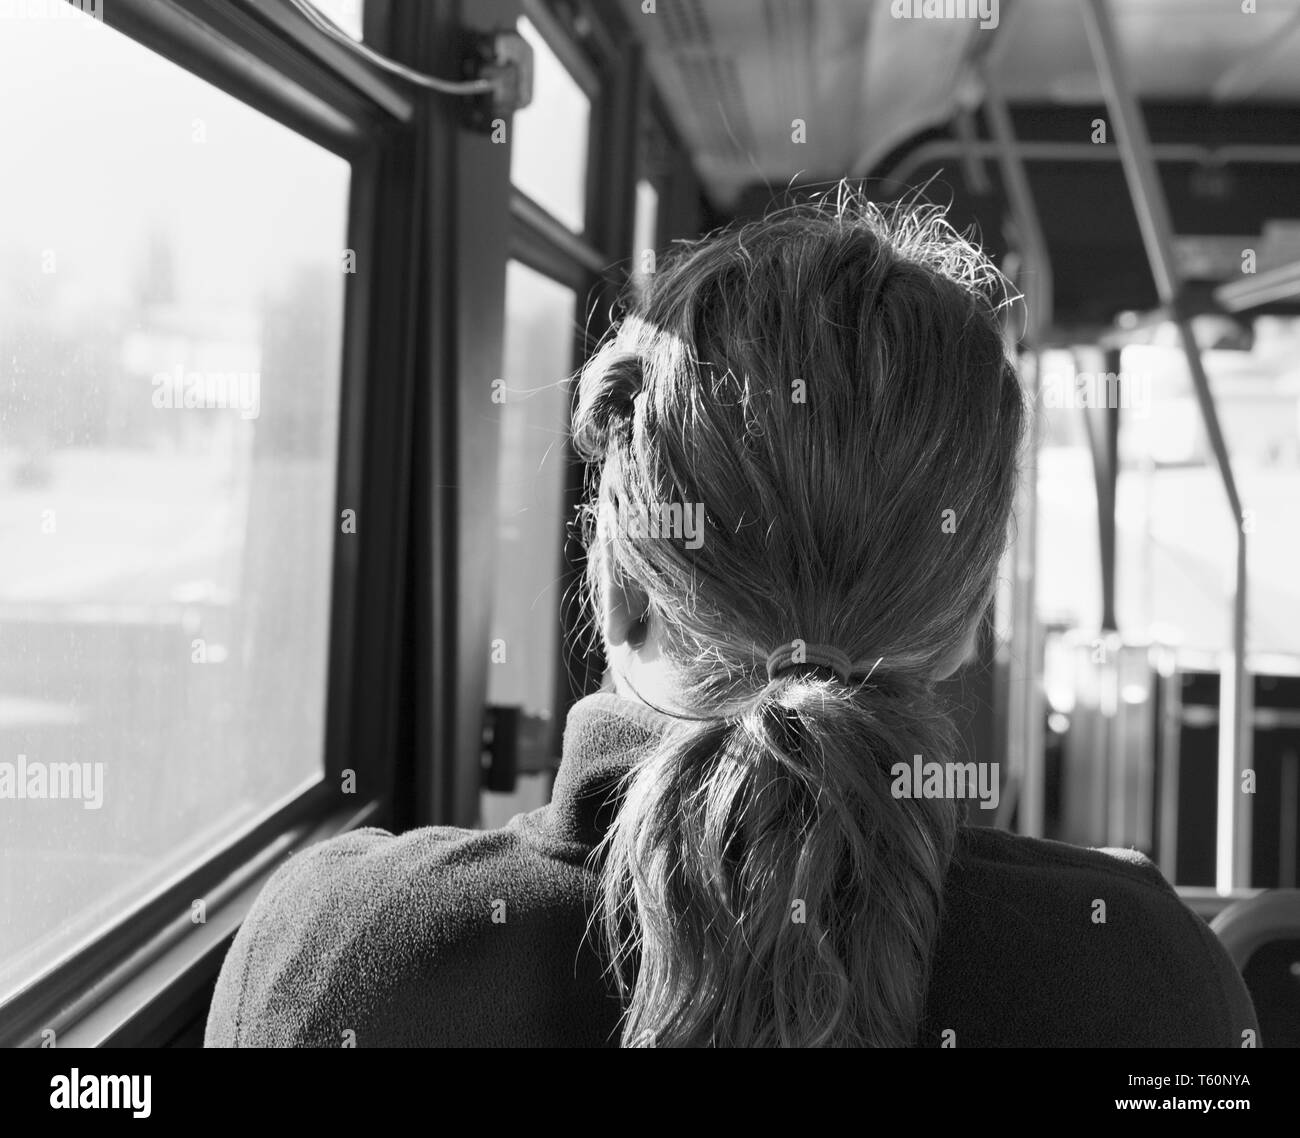 Rear view of a woman on a bus. Stock Photo